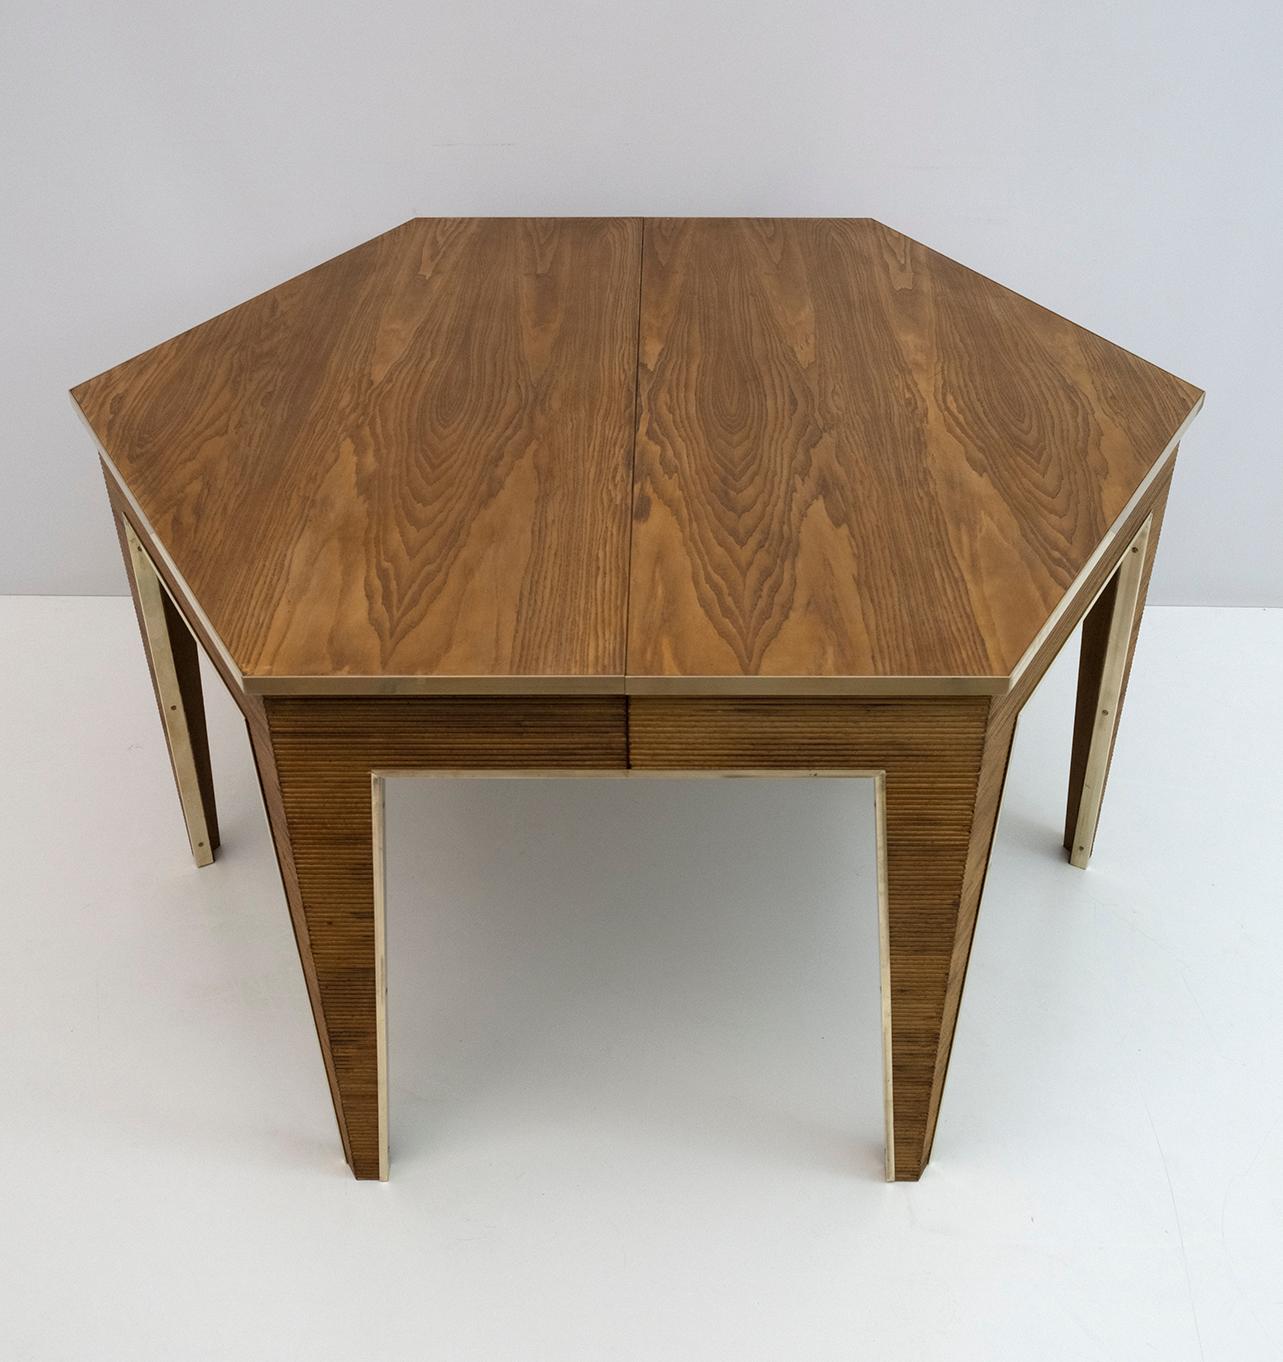 Hexagonal table from the 1970s, in the style of Gabriella Crespi, in chestnut wood and brass, breadstick work on the base, the table is extendable, has four extensions and reaches a length of 307 cm. The table has been restored and the brass has